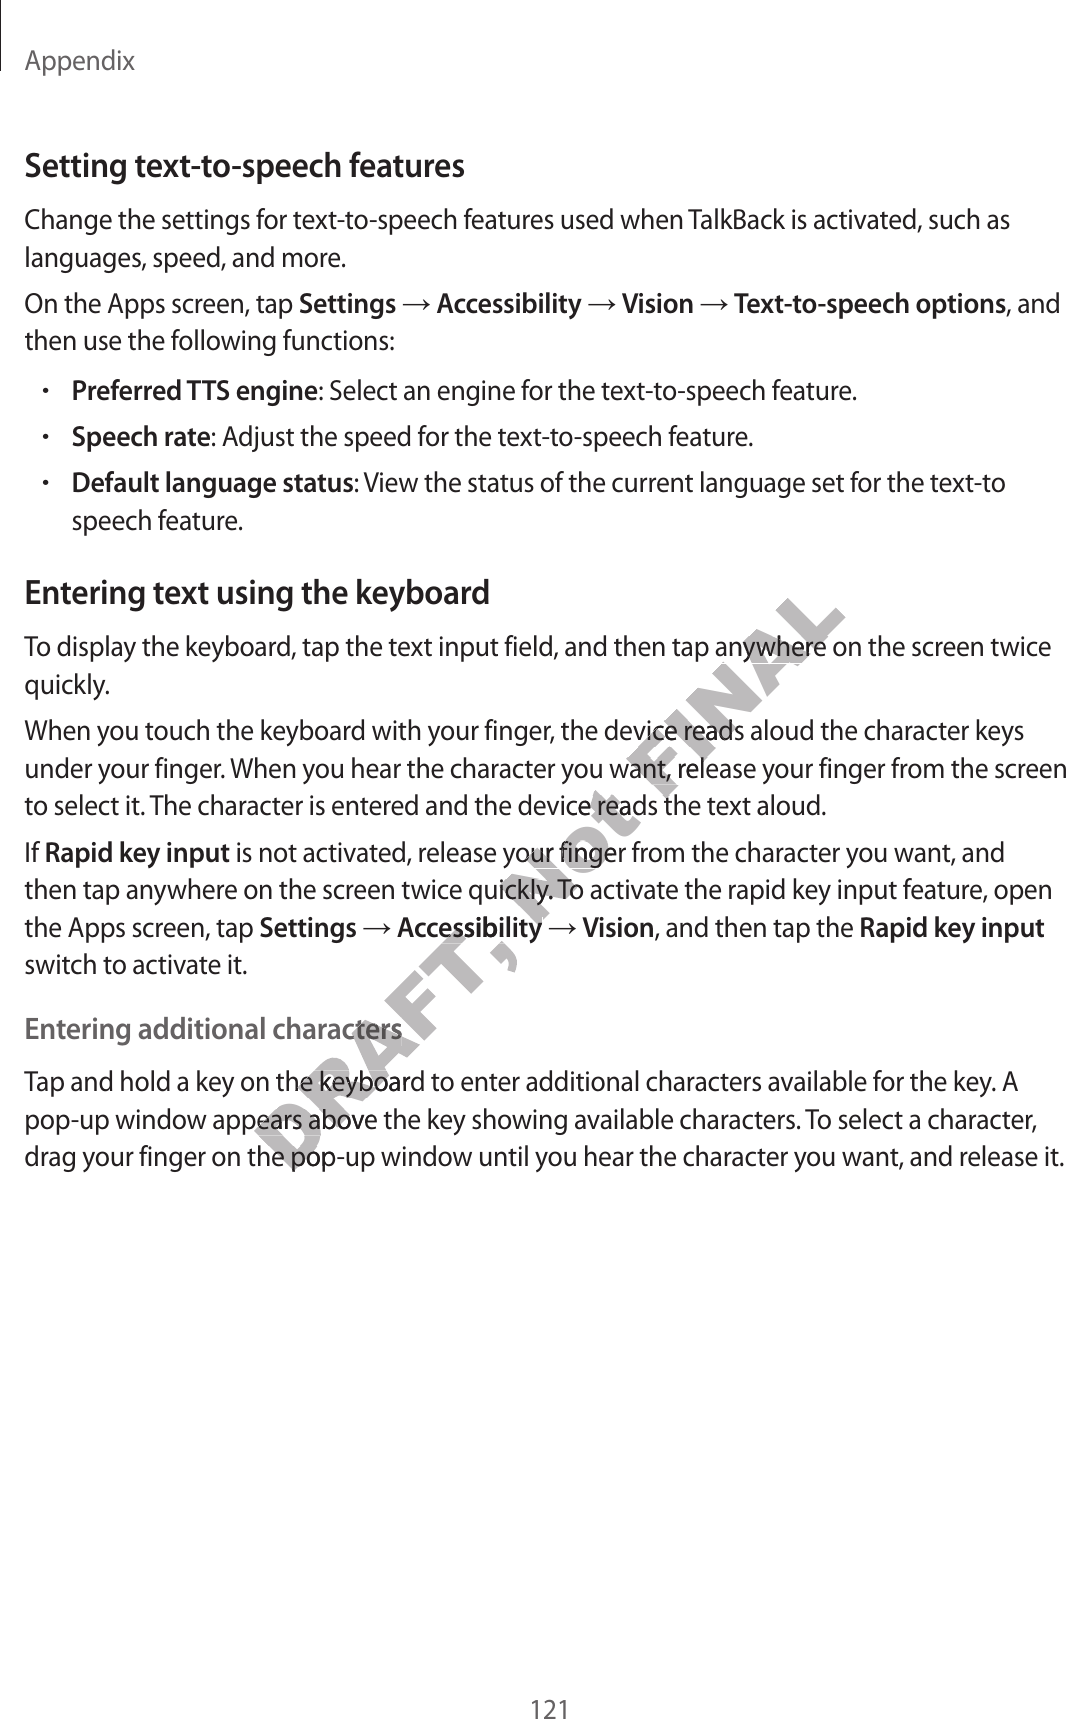 Appendix121Setting text-to-speech featuresChange the settings for text-to-speech features used when TalkBack is activated, such as languages, speed, and more.On the Apps screen, tap Settings ĺ Accessibility ĺ Vision ĺ Text-to-speech options, and then use the following functions:•Preferred TTS engine: Select an engine for the text-to-speech feature.•Speech rate: Adjust the speed for the text-to-speech feature.•Default language status: View the status of the current language set for the text-tospeech feature.Entering text using the keyboardTo display the keyboard, tap the text input field, and then tap anywhere on the screen twice quickly.When you touch the keyboard with your finger, the device reads aloud the character keys under your finger. When you hear the character you want, release your finger from the screen to select it. The character is entered and the device reads the text aloud.If Rapid key input is not activated, release your finger from the character you want, and then tap anywhere on the screen twice quickly. To activate the rapid key input feature, open the Apps screen, tap Settings ĺ Accessibility ĺ Vision, and then tap the Rapid key input switch to activate it.Entering additional charactersTap and hold a key on the keyboard to enter additional characters available for the key. A pop-up window appears above the key showing available characters. To select a character, drag your finger on the pop-up window until you hear the character you want, and release it.ccessibilitccessibilitering additional charactersering additional charactersDRAFT, ap and hold a key on the keyboard tap and hold a key on the keyboarw appears above the key show appears abovDRAFT, our finger on the pop-up windoour finger on the popNot ou wed and the device reads the ted and the device reads the telease your finger frelease your finger fre quickly. To ace quickly. To acessibilityessibilityFINAL, and then tap anywhere on the scr, and then tap anywhere on the scr, the device reads aloud the char, the device reads aloud the charou want, release you want, release yeads the teads the t